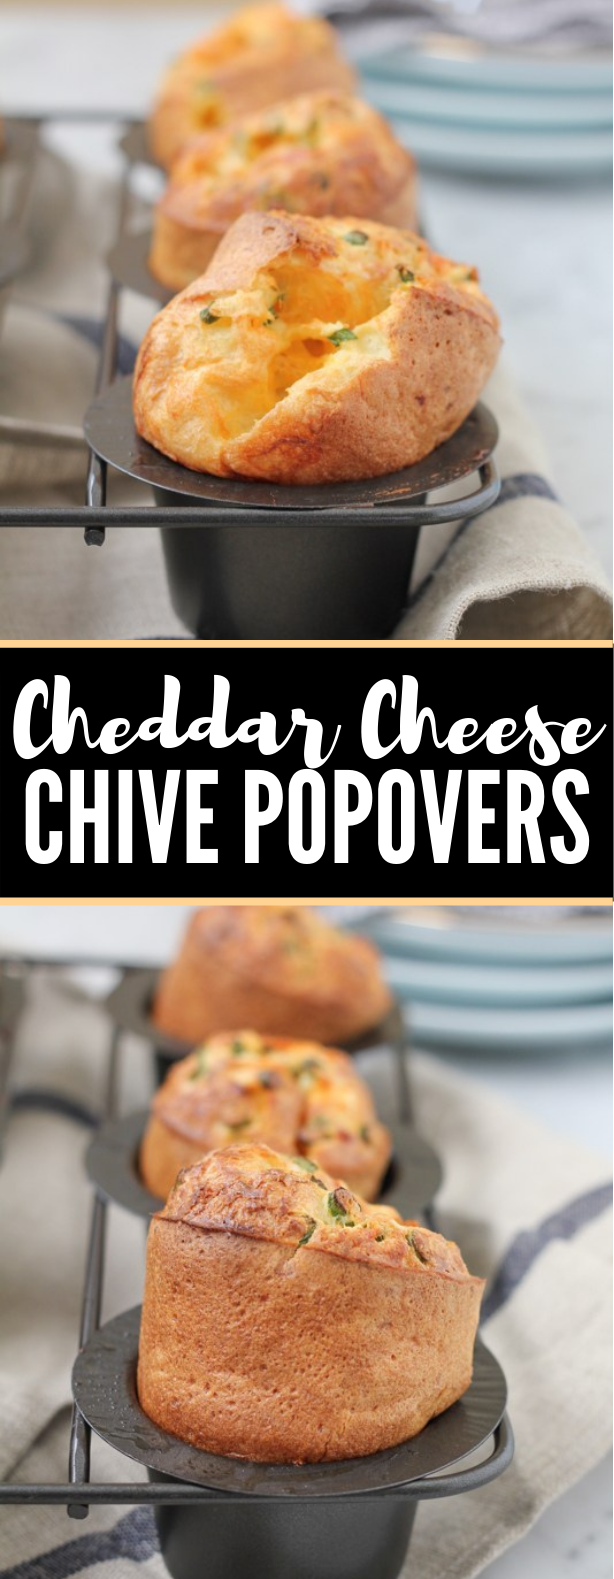 CHEDDAR CHEESE AND CHIVE POPOVERS #appetizers #foodrecipe #brunch #breakfrast #comfortfood